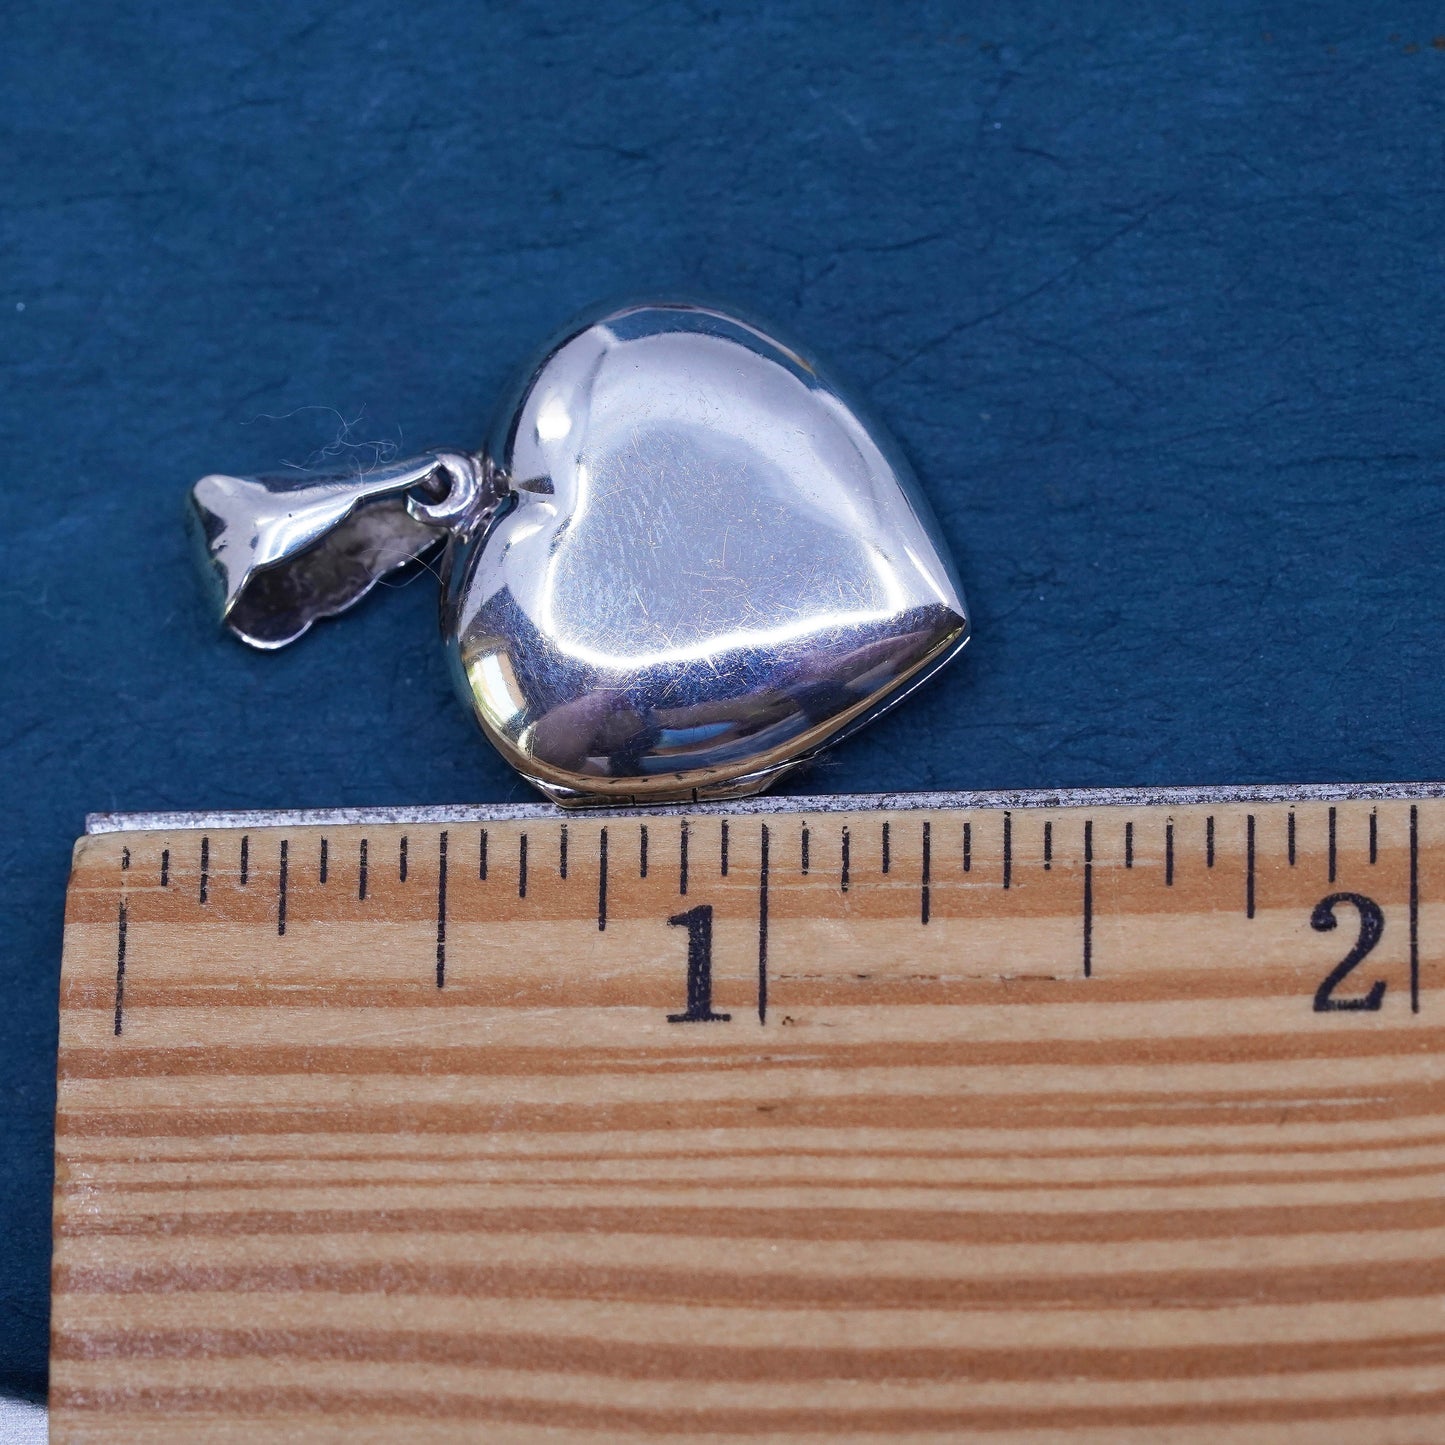 Vintage Sterling silver handmade pendant, 925 heart photo locket with mom